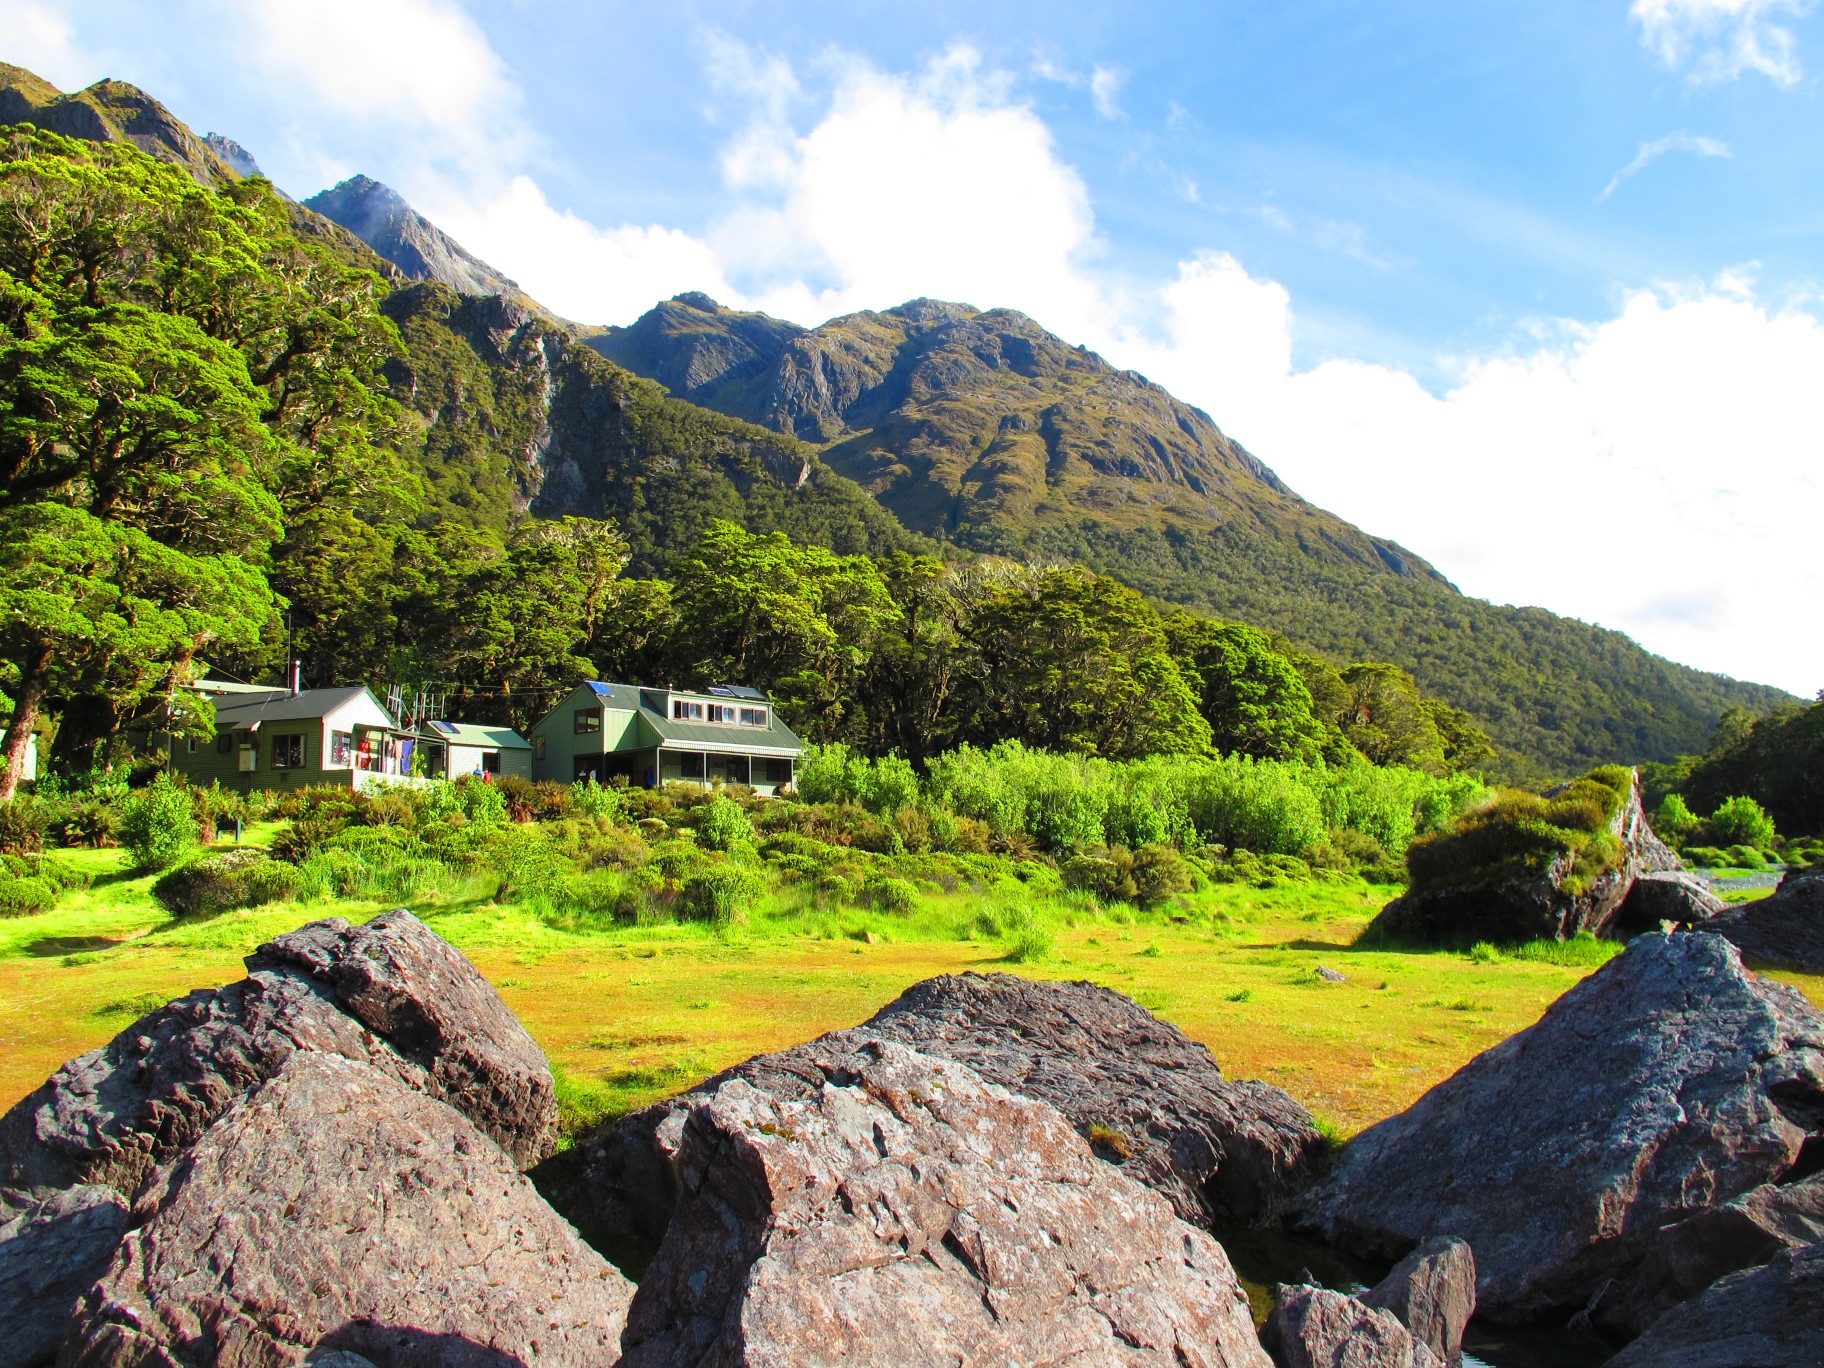 Staying in a New Zealand tramping (hiking) hut